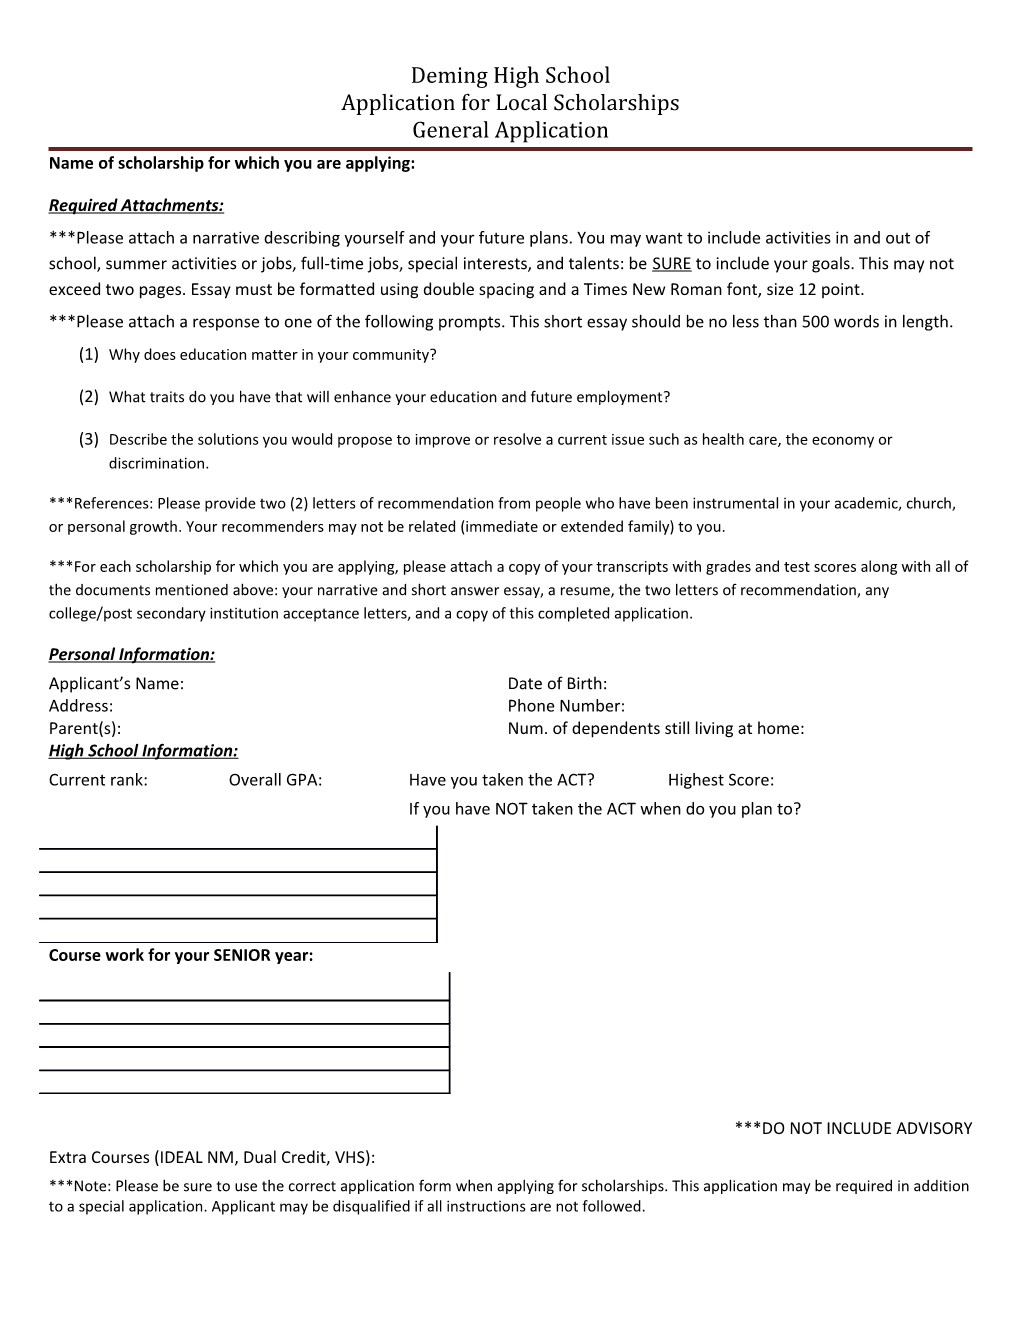 Deming High School Application for Local Scholarships General Application